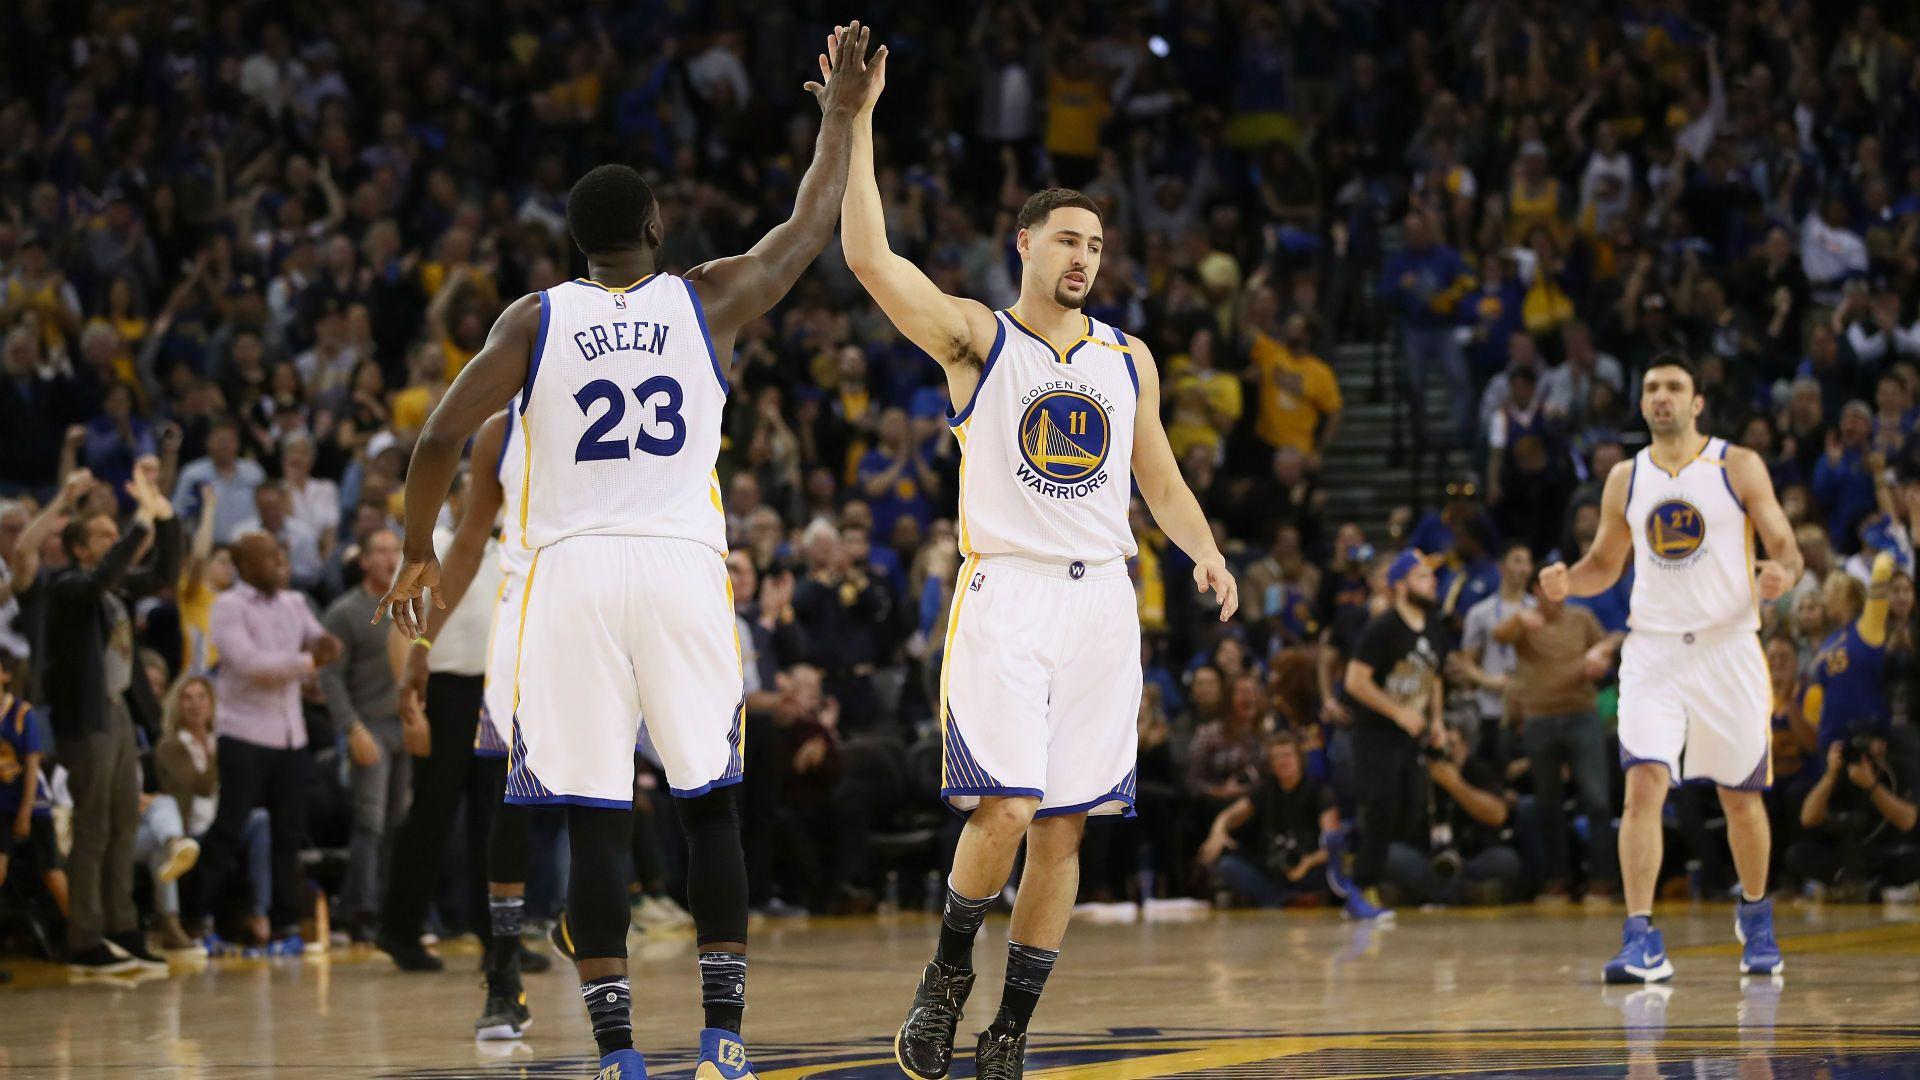 Draymond Green, Klay Thompson joke about consequences if not